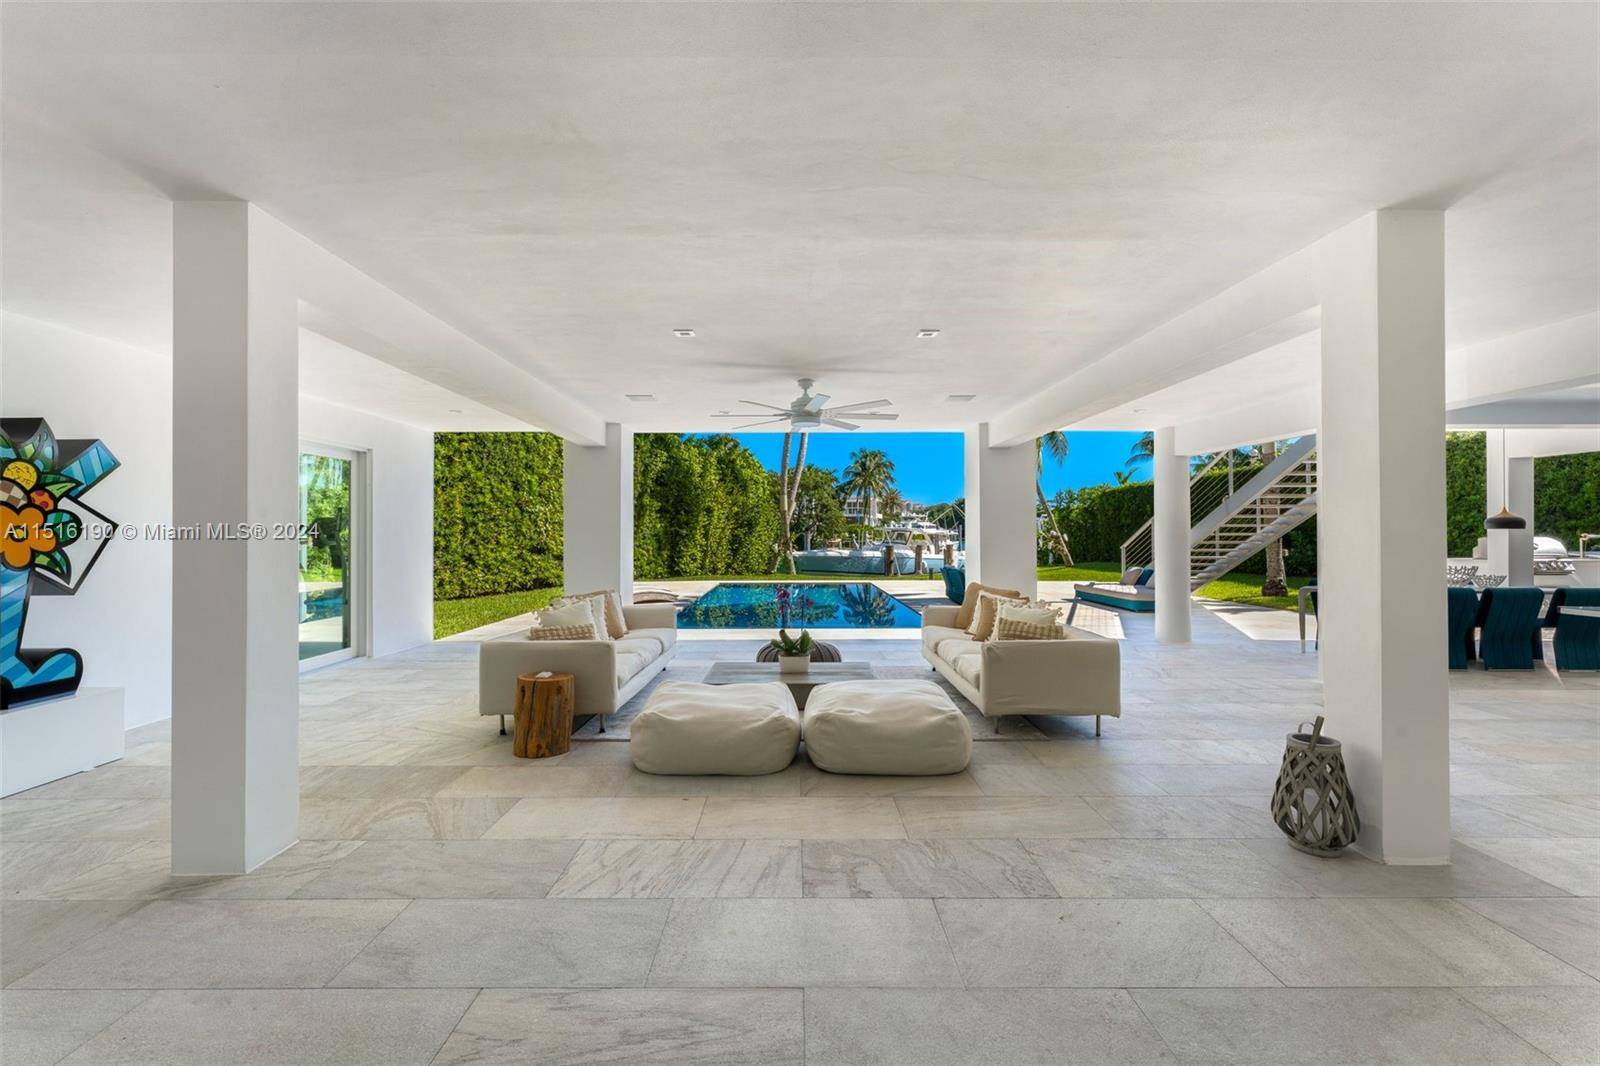 Located on exclusive Mashta Island, this magnificent waterfront dream residence has been completely remodeled to offer the most luxurious and contemporary living experience.